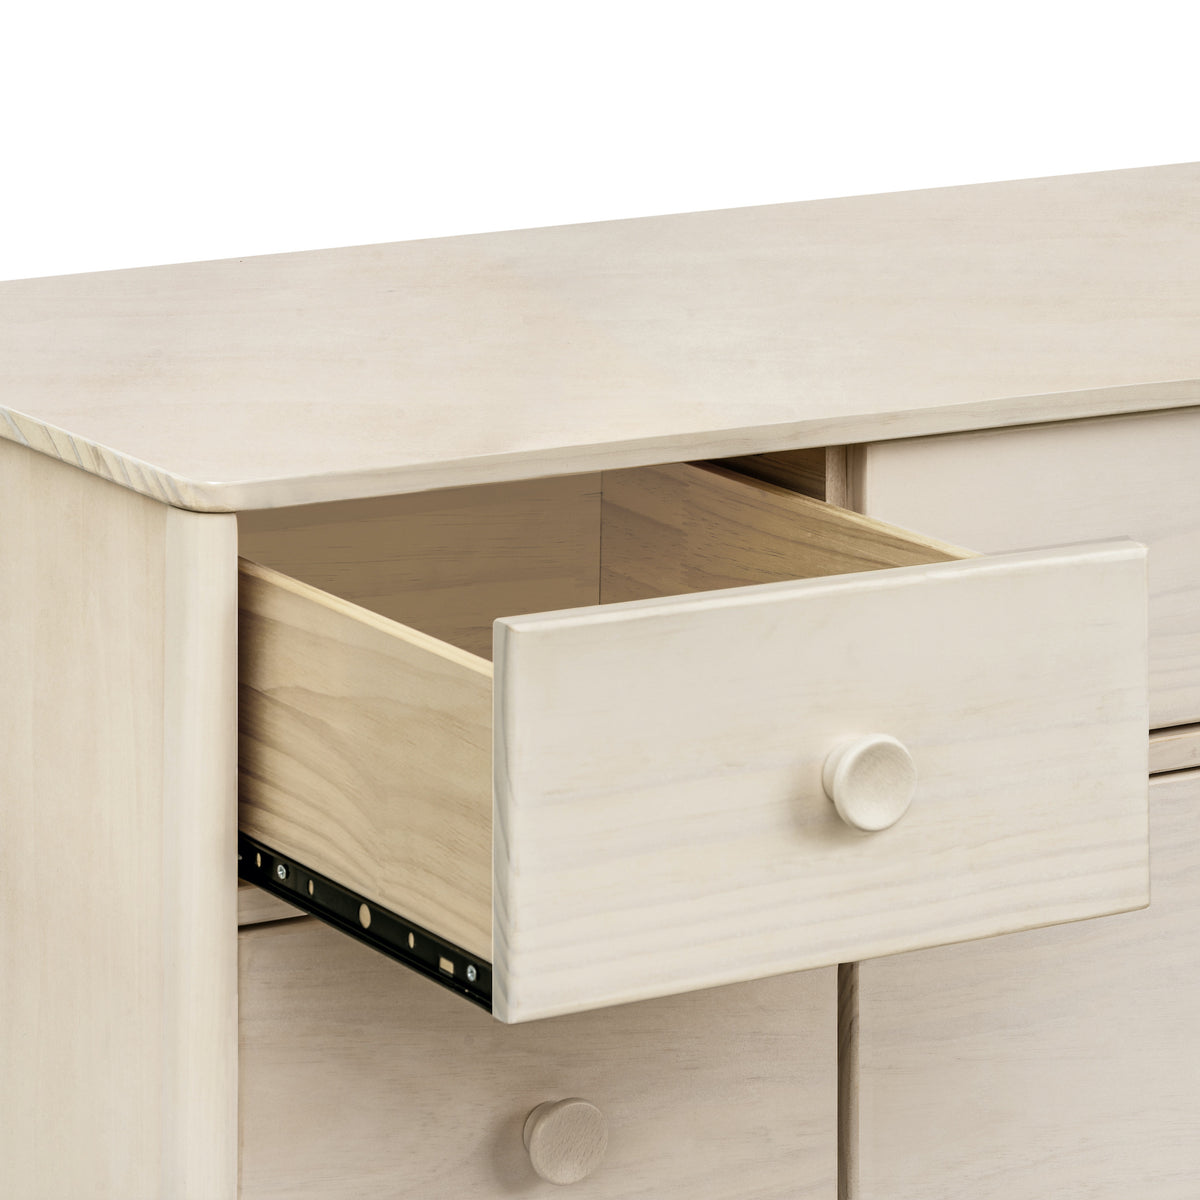 Lolly 6-Drawer Double Dresser - Natural